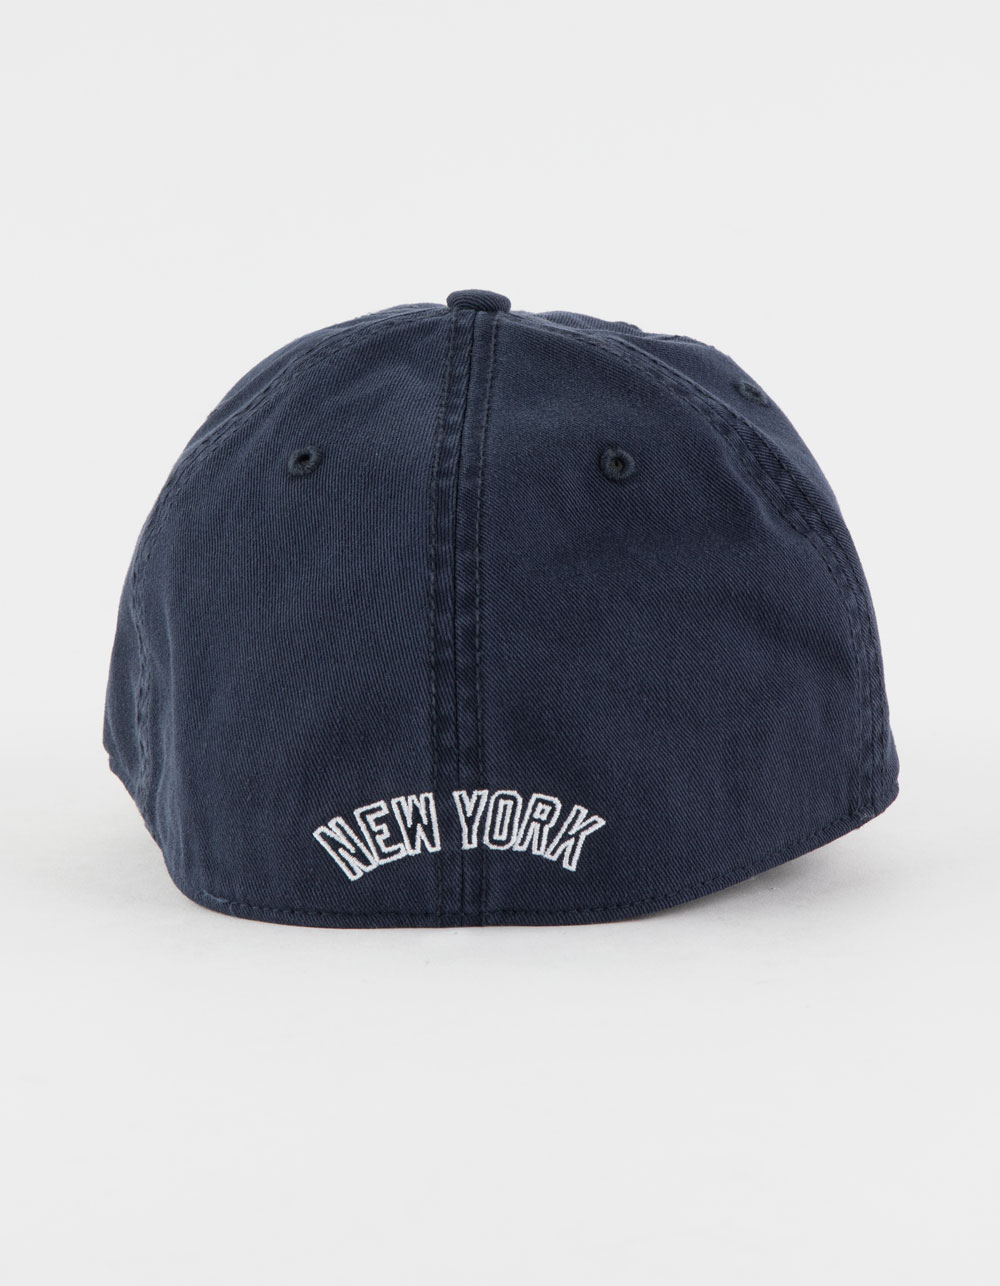 47 Brand NY yankees hat Blue - $31 (36% Off Retail) New With Tags